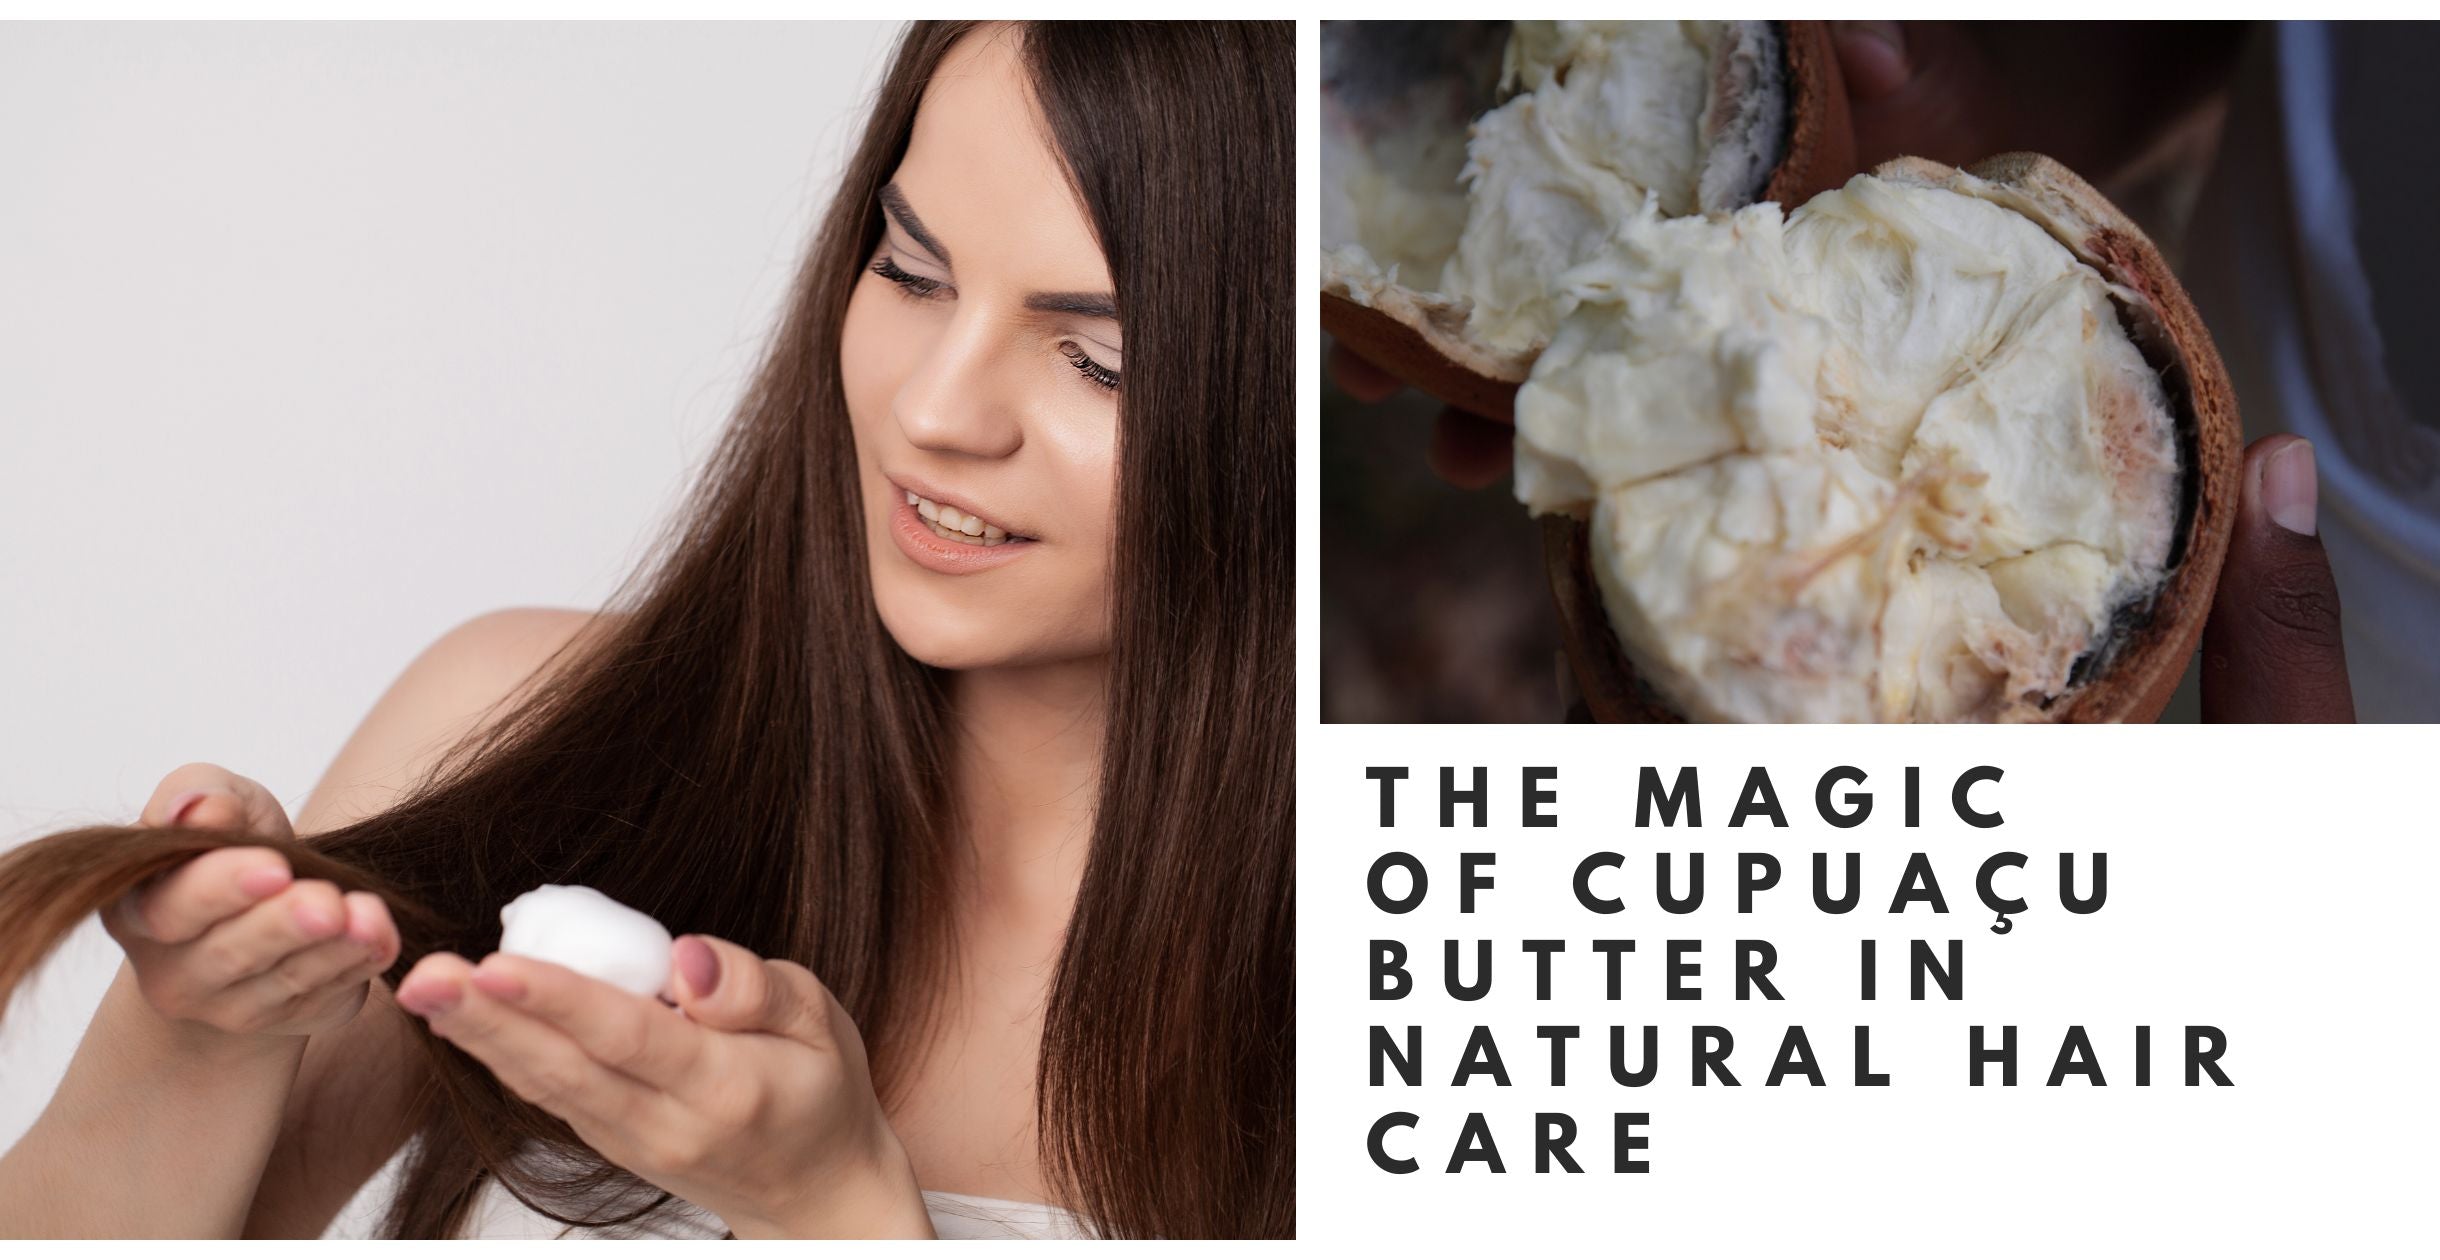 The Magic of Cupuaçu Butter in Natural Hair Care